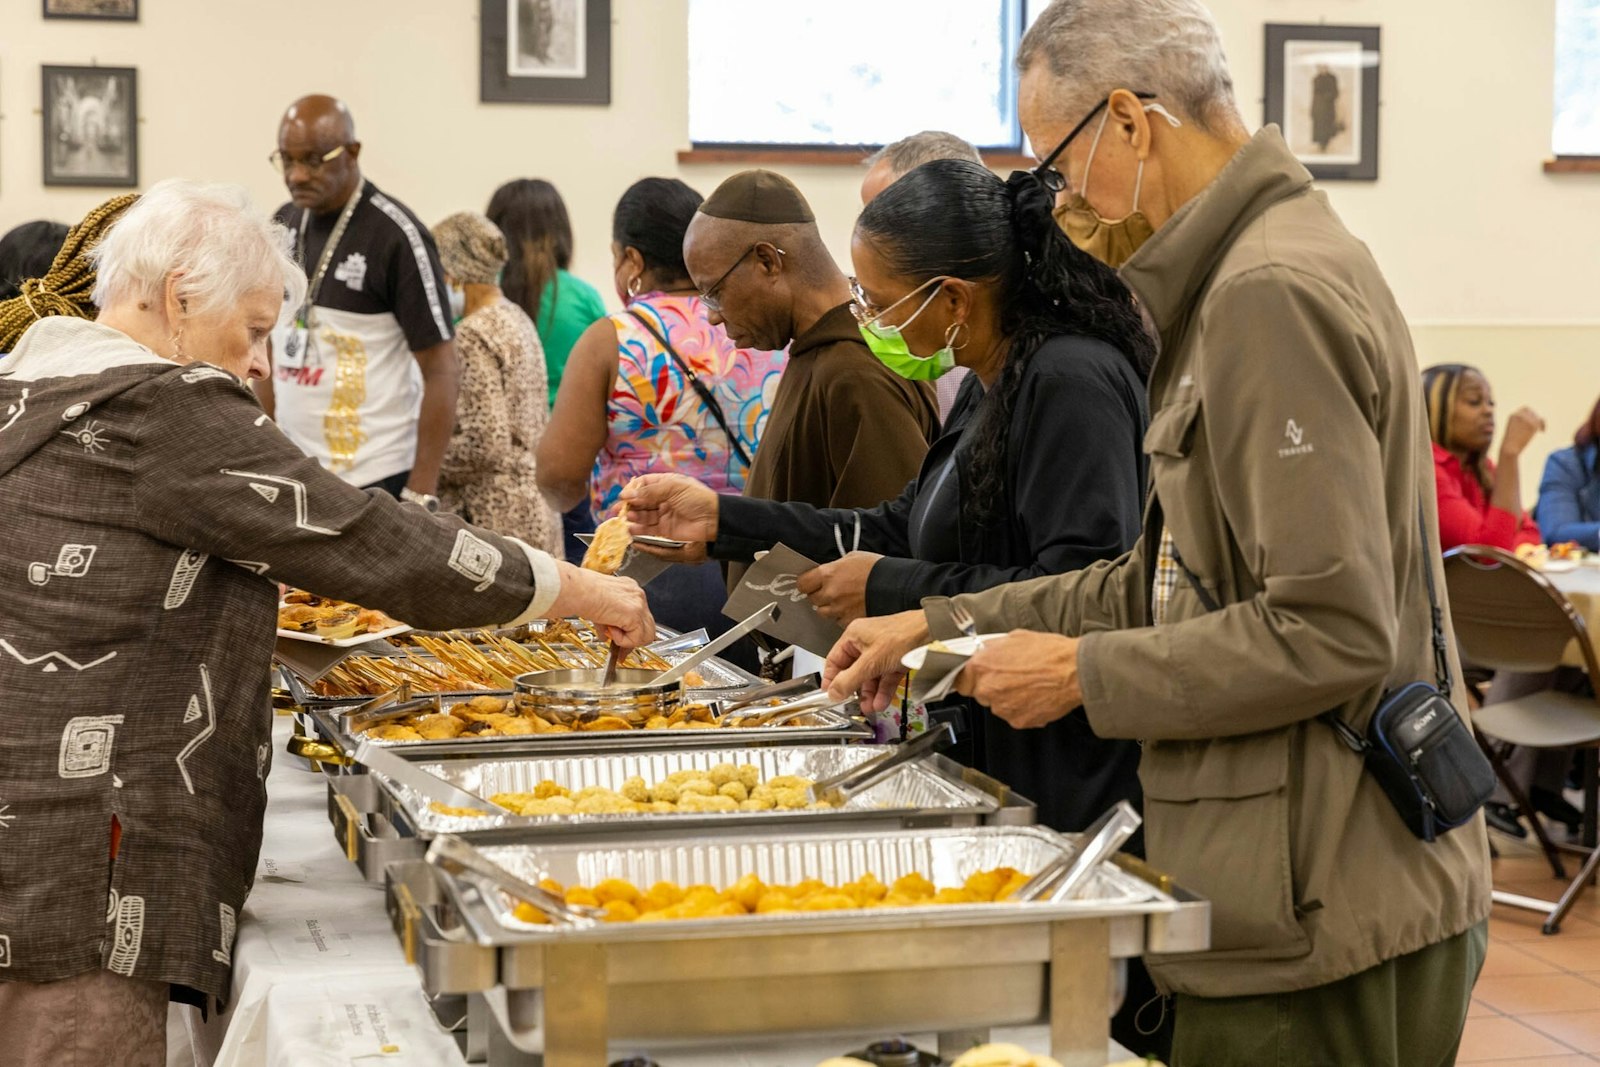 Many of the soup kitchen's patrons suffer from mental health disorders, which requires staff and volunteers to be sensitive to various needs, Bro. Malloy said.